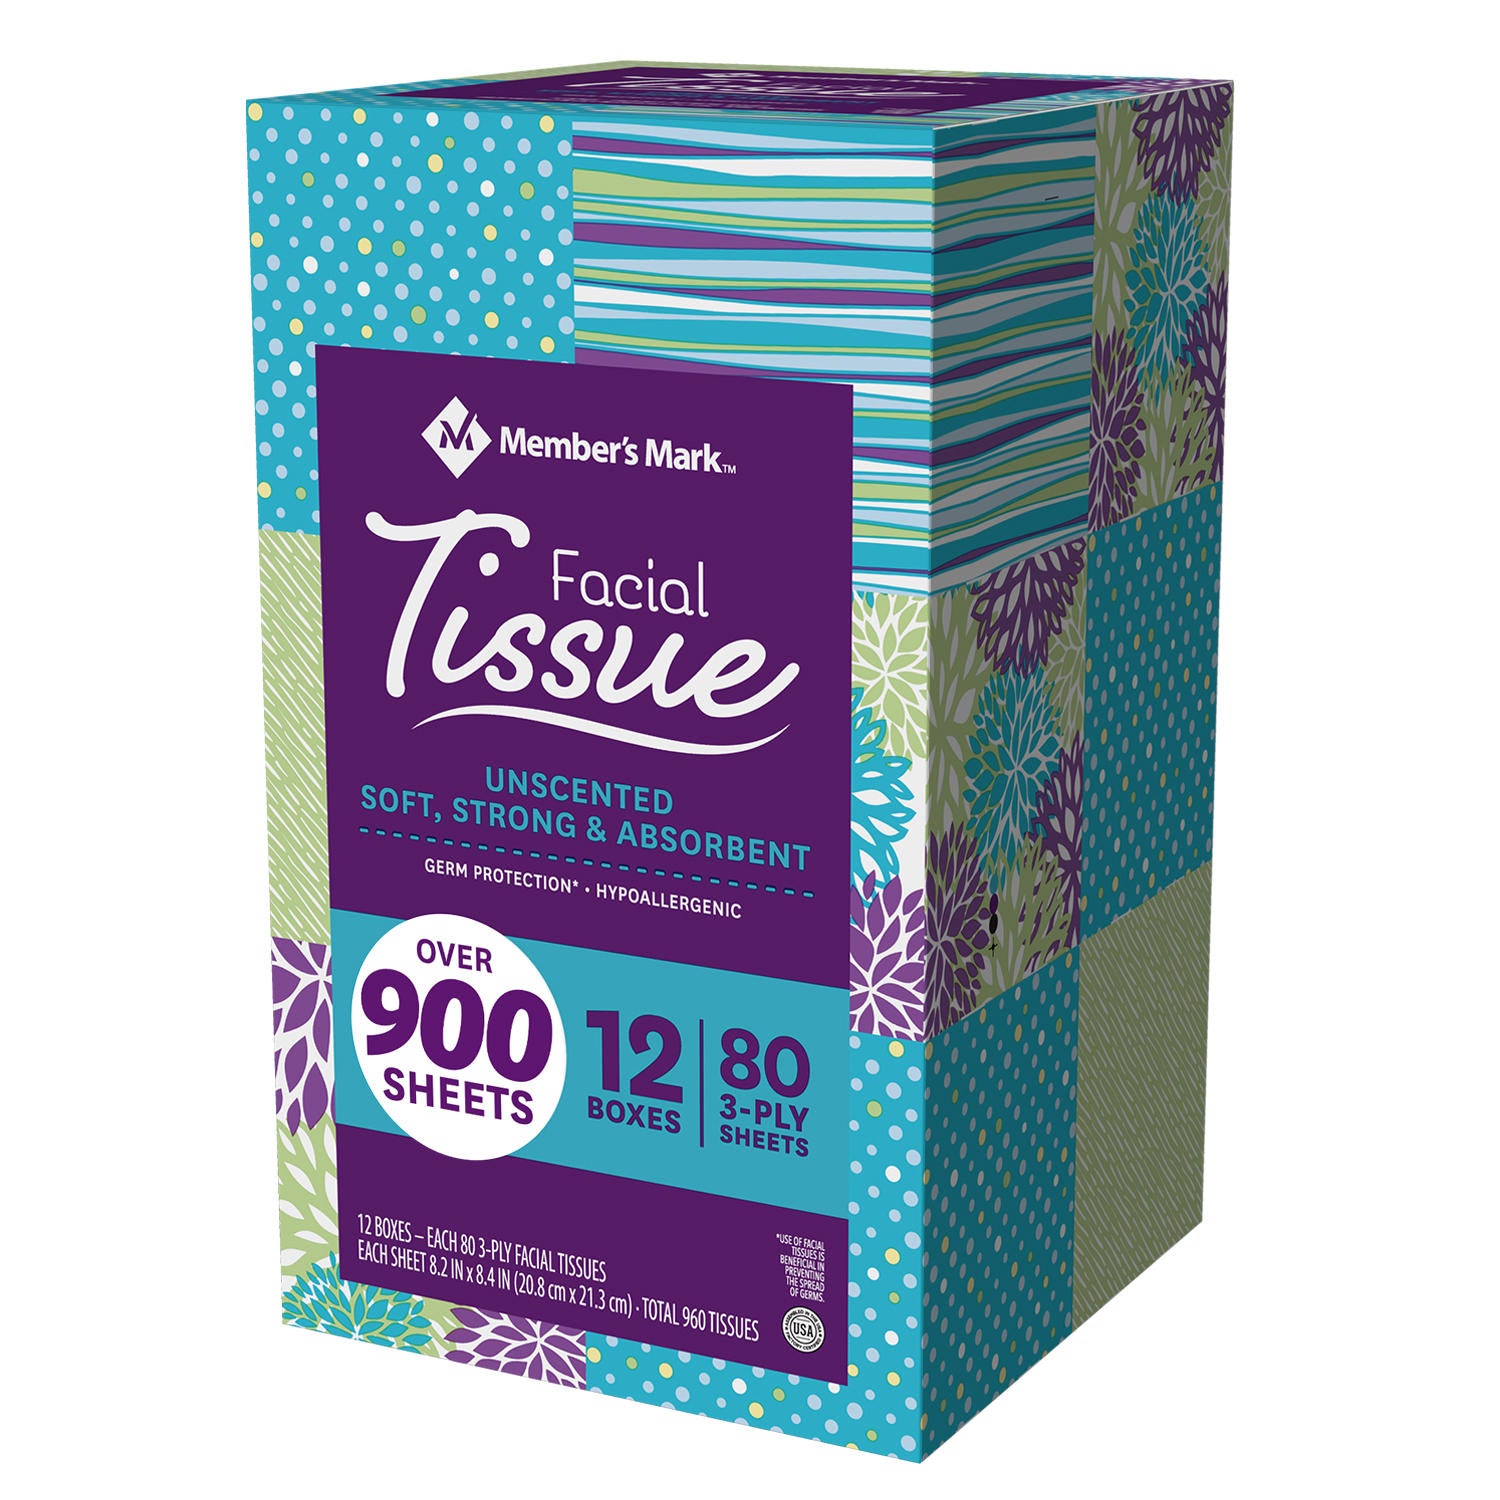 Member’s Mark Ultra Soft 3-Ply Facial Tissues, Cube Box, 80 Tissues, 12 Ct, 1 Case